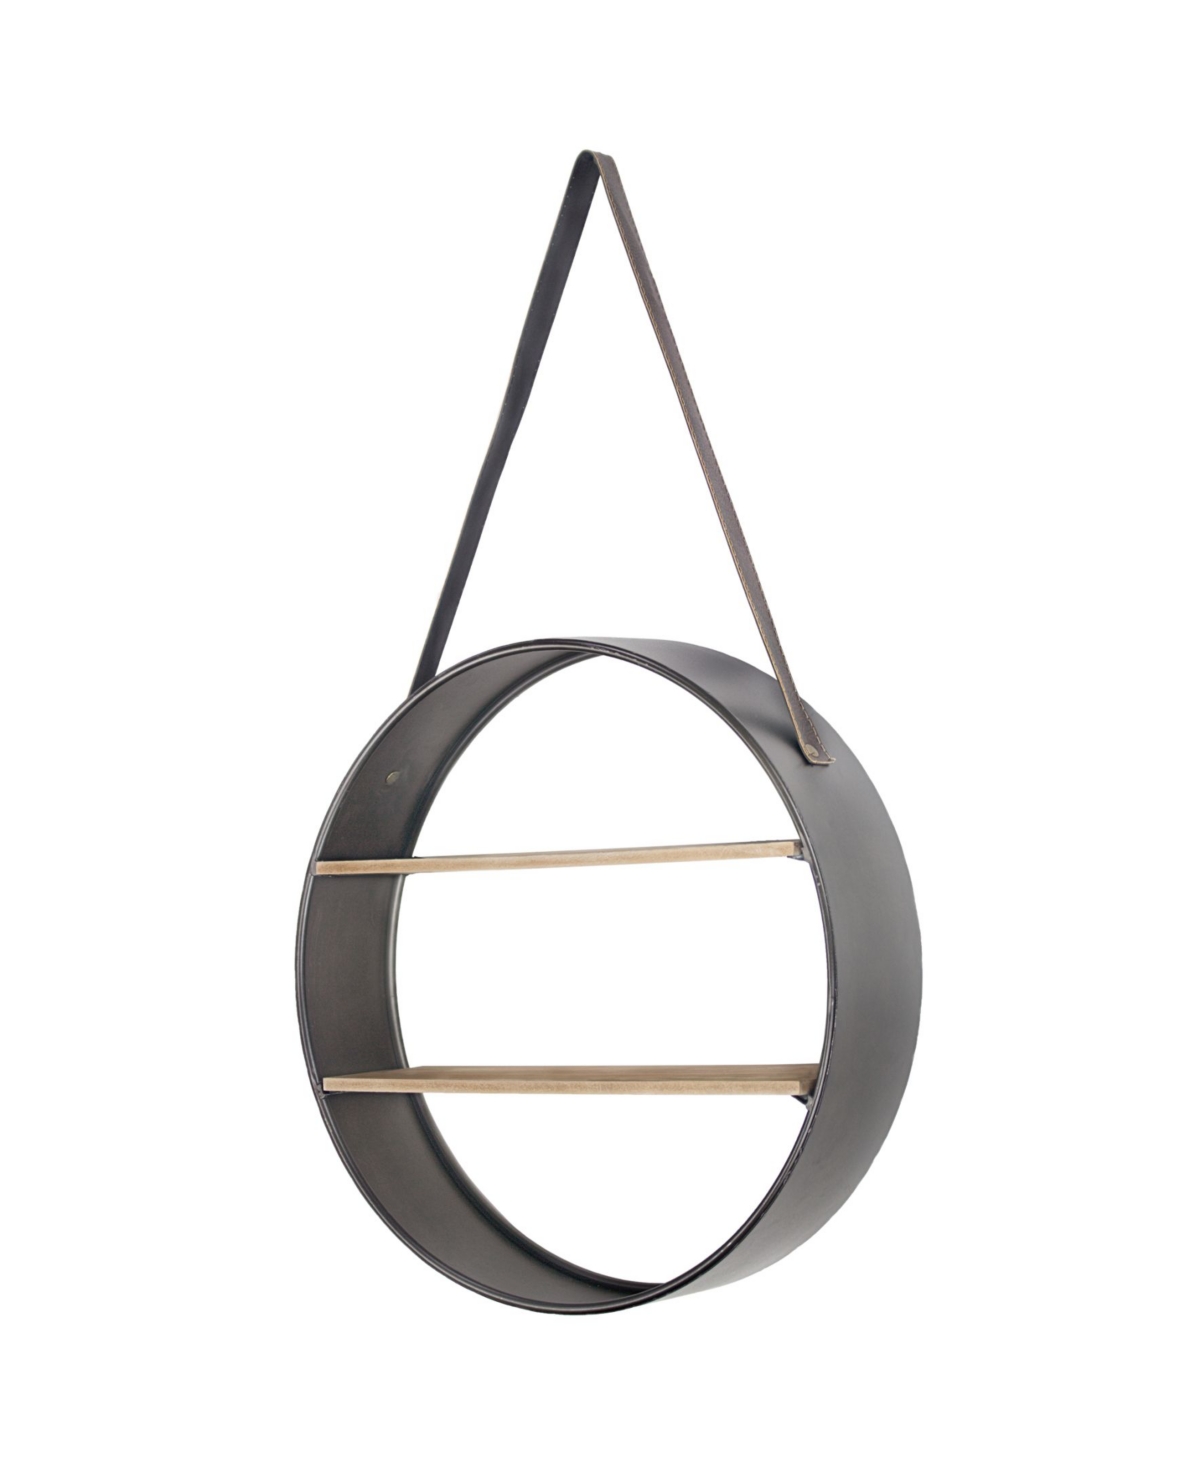 American Art Decor and Wood Round Hanging Wall Shelf with Strap - Brown